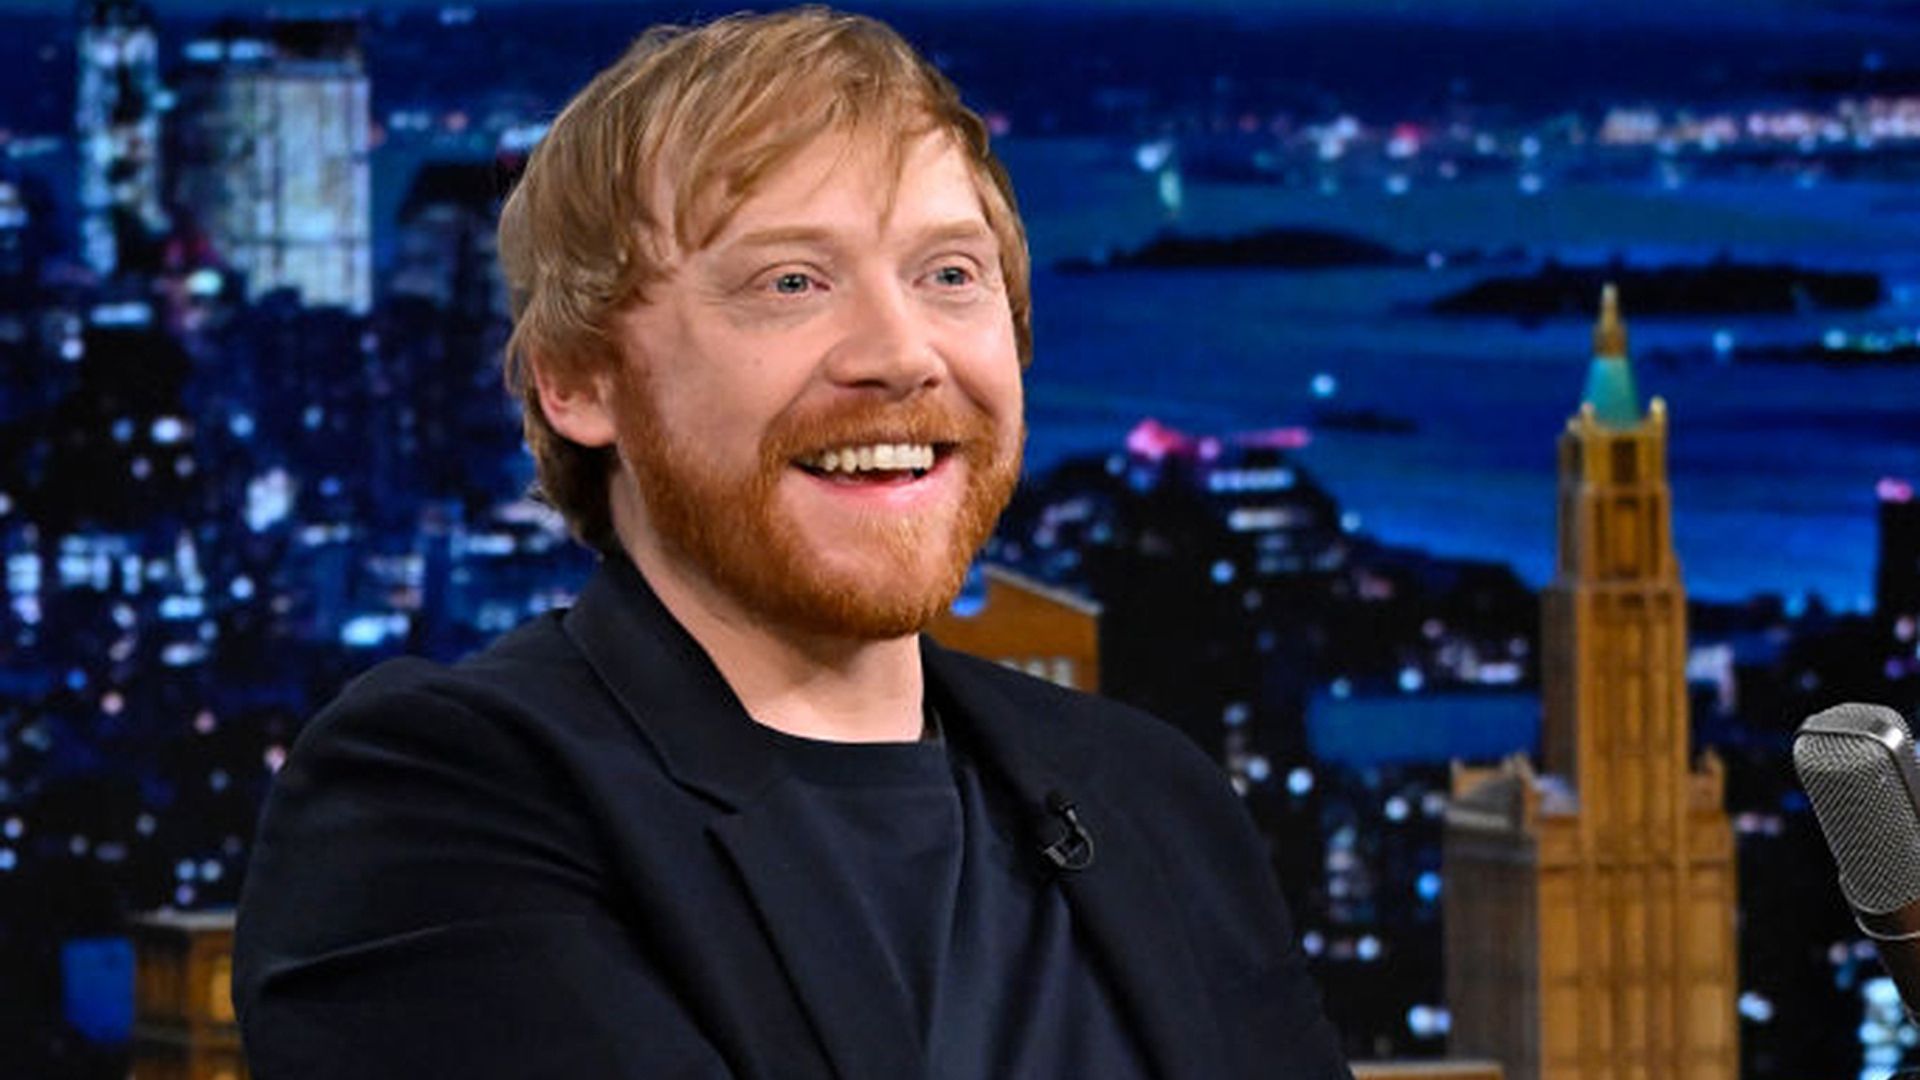 Harry Potter star Rupert Grint gives adorable update on daughter Wednesday